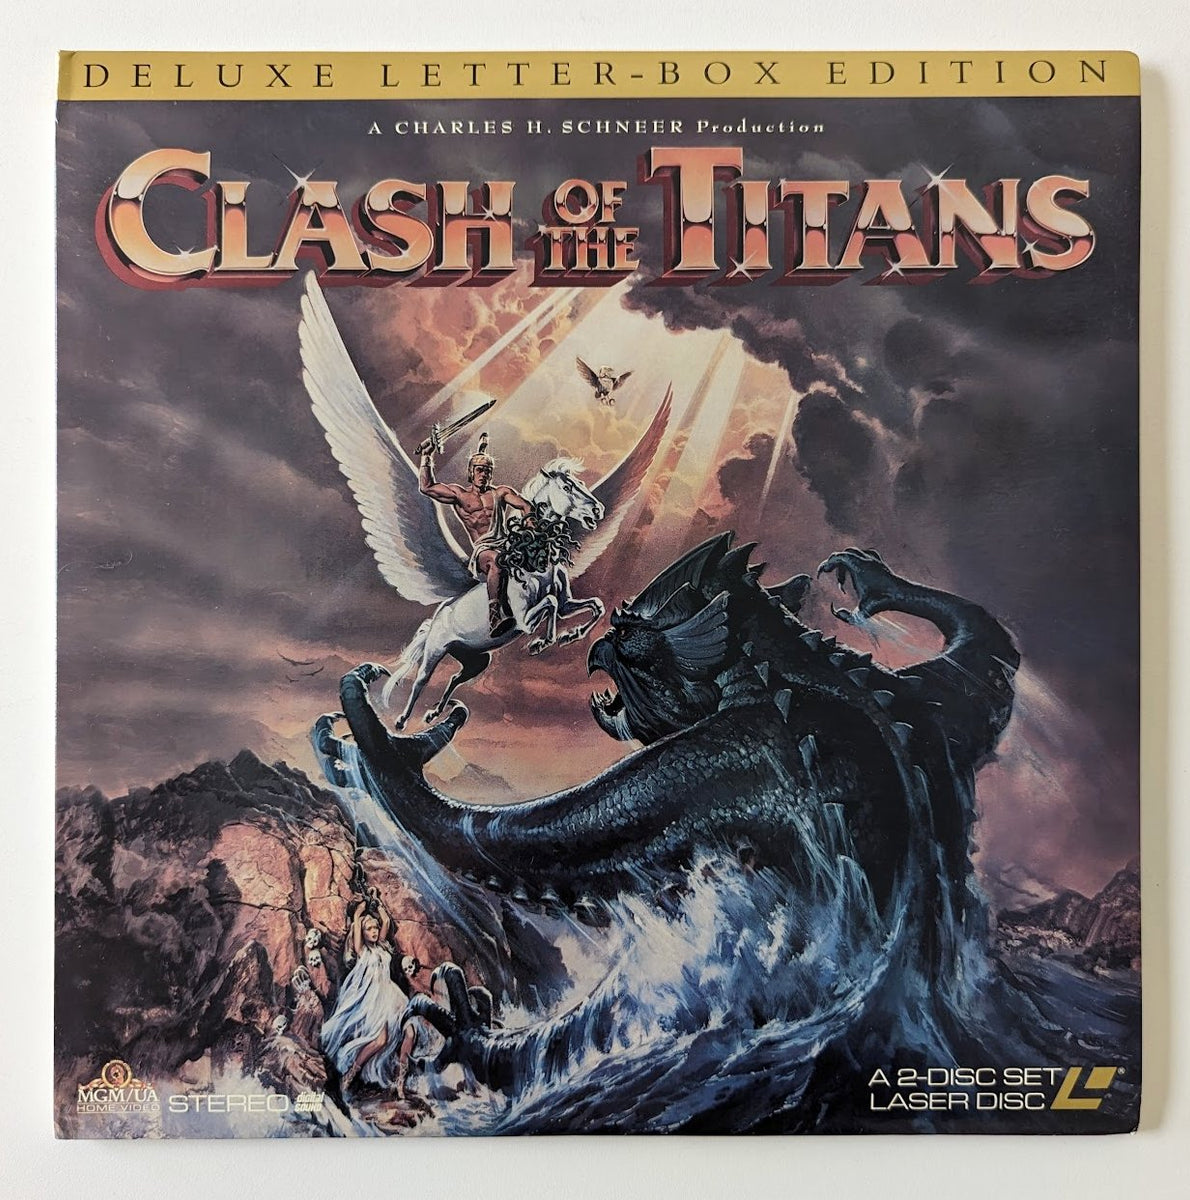 Vintage Clash of the Titans Board Game Whitman 1981 Used Movie - 98%  Complete